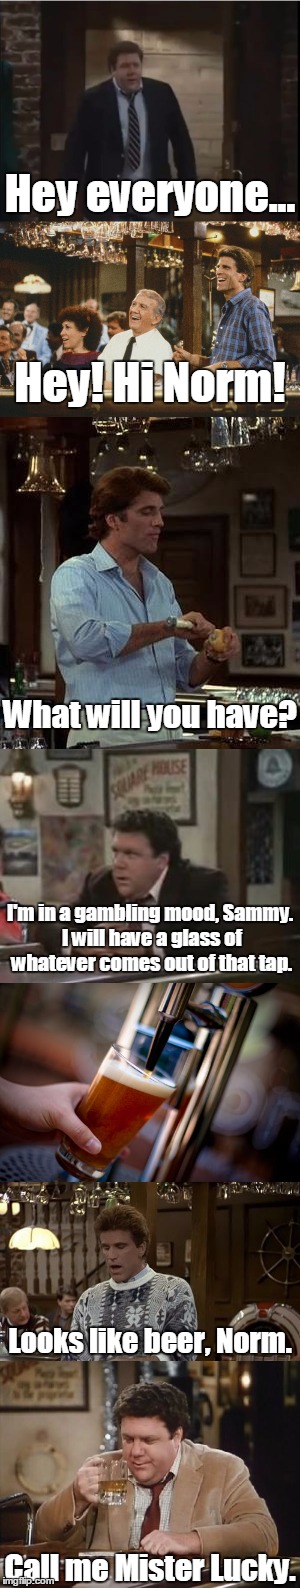 Cheers | Hey everyone... Hey! Hi Norm! What will you have? I'm in a gambling mood, Sammy. I will have a glass of whatever comes out of that tap. Looks like beer, Norm. Call me Mister Lucky. | image tagged in cheers,norm,joke,funny,nostalgia | made w/ Imgflip meme maker